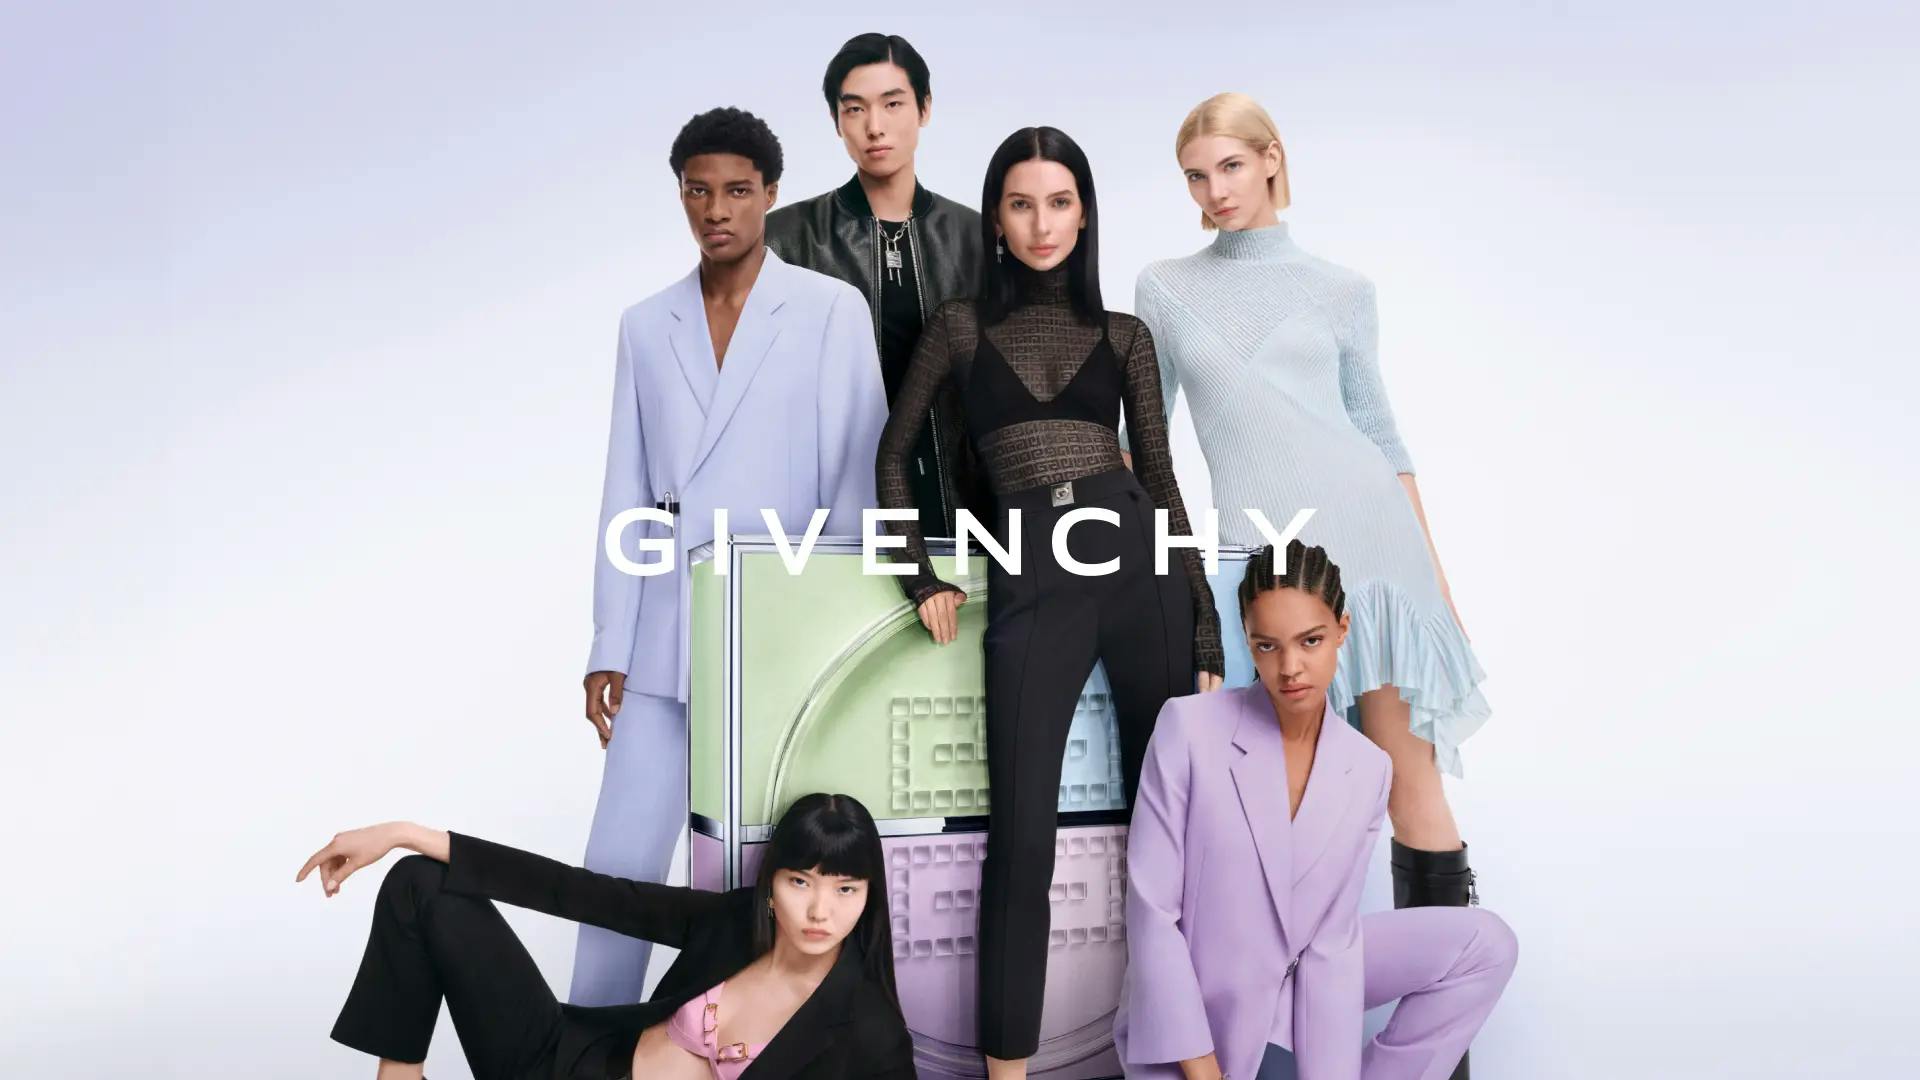 Givenchy logo with a photo from the Prisme Libre Loose Powder campaign